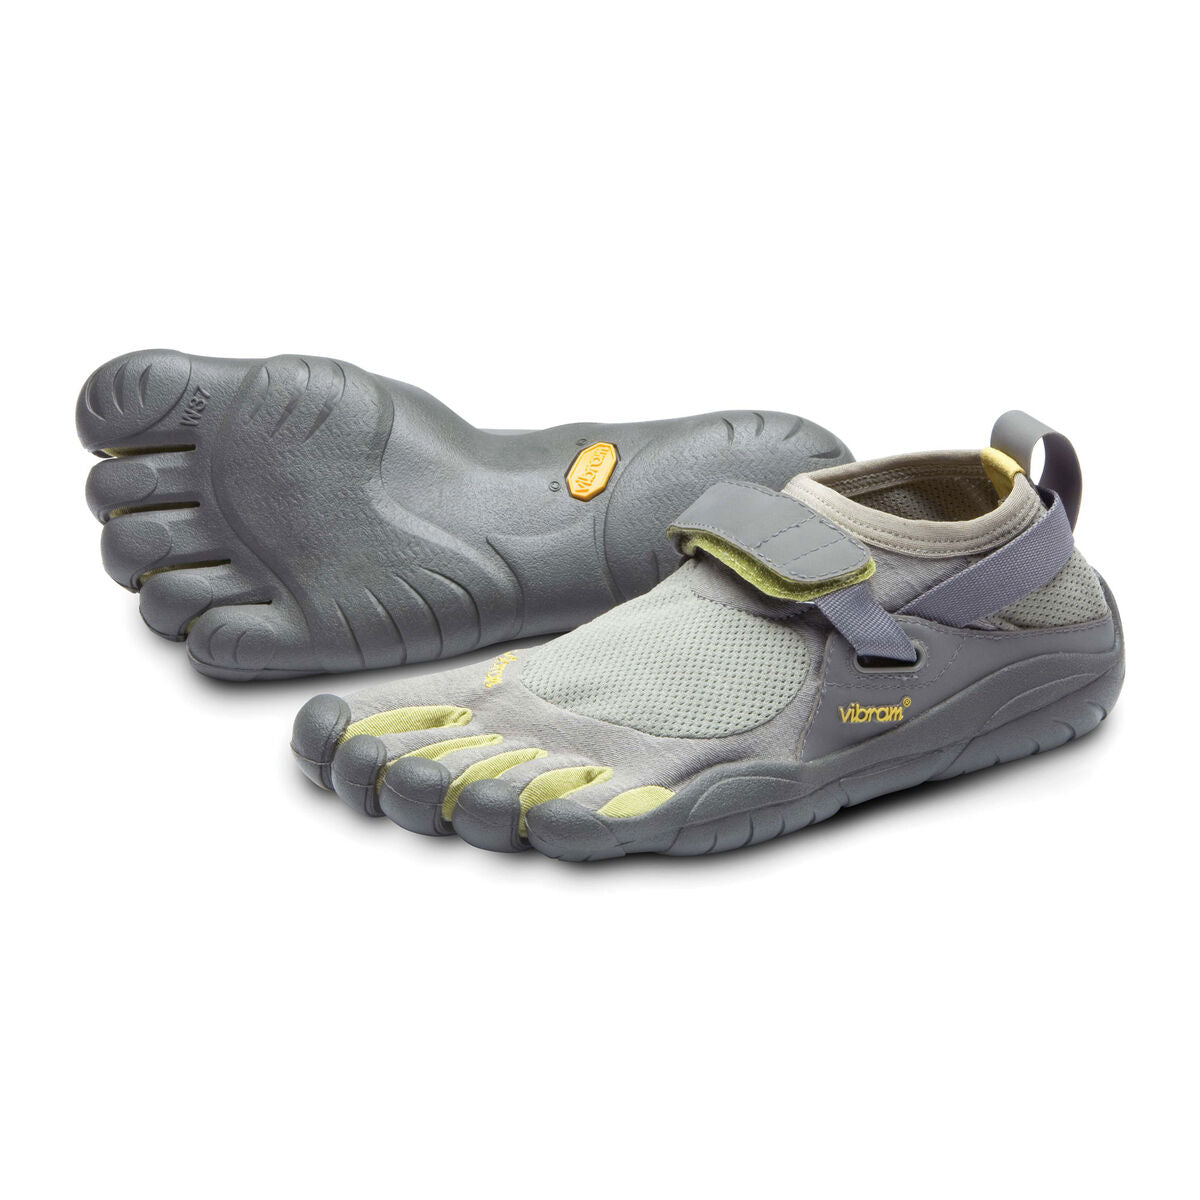 Women's Vibram Five Fingers KSO Training Shoe in Grey/Palm/Clay from the front